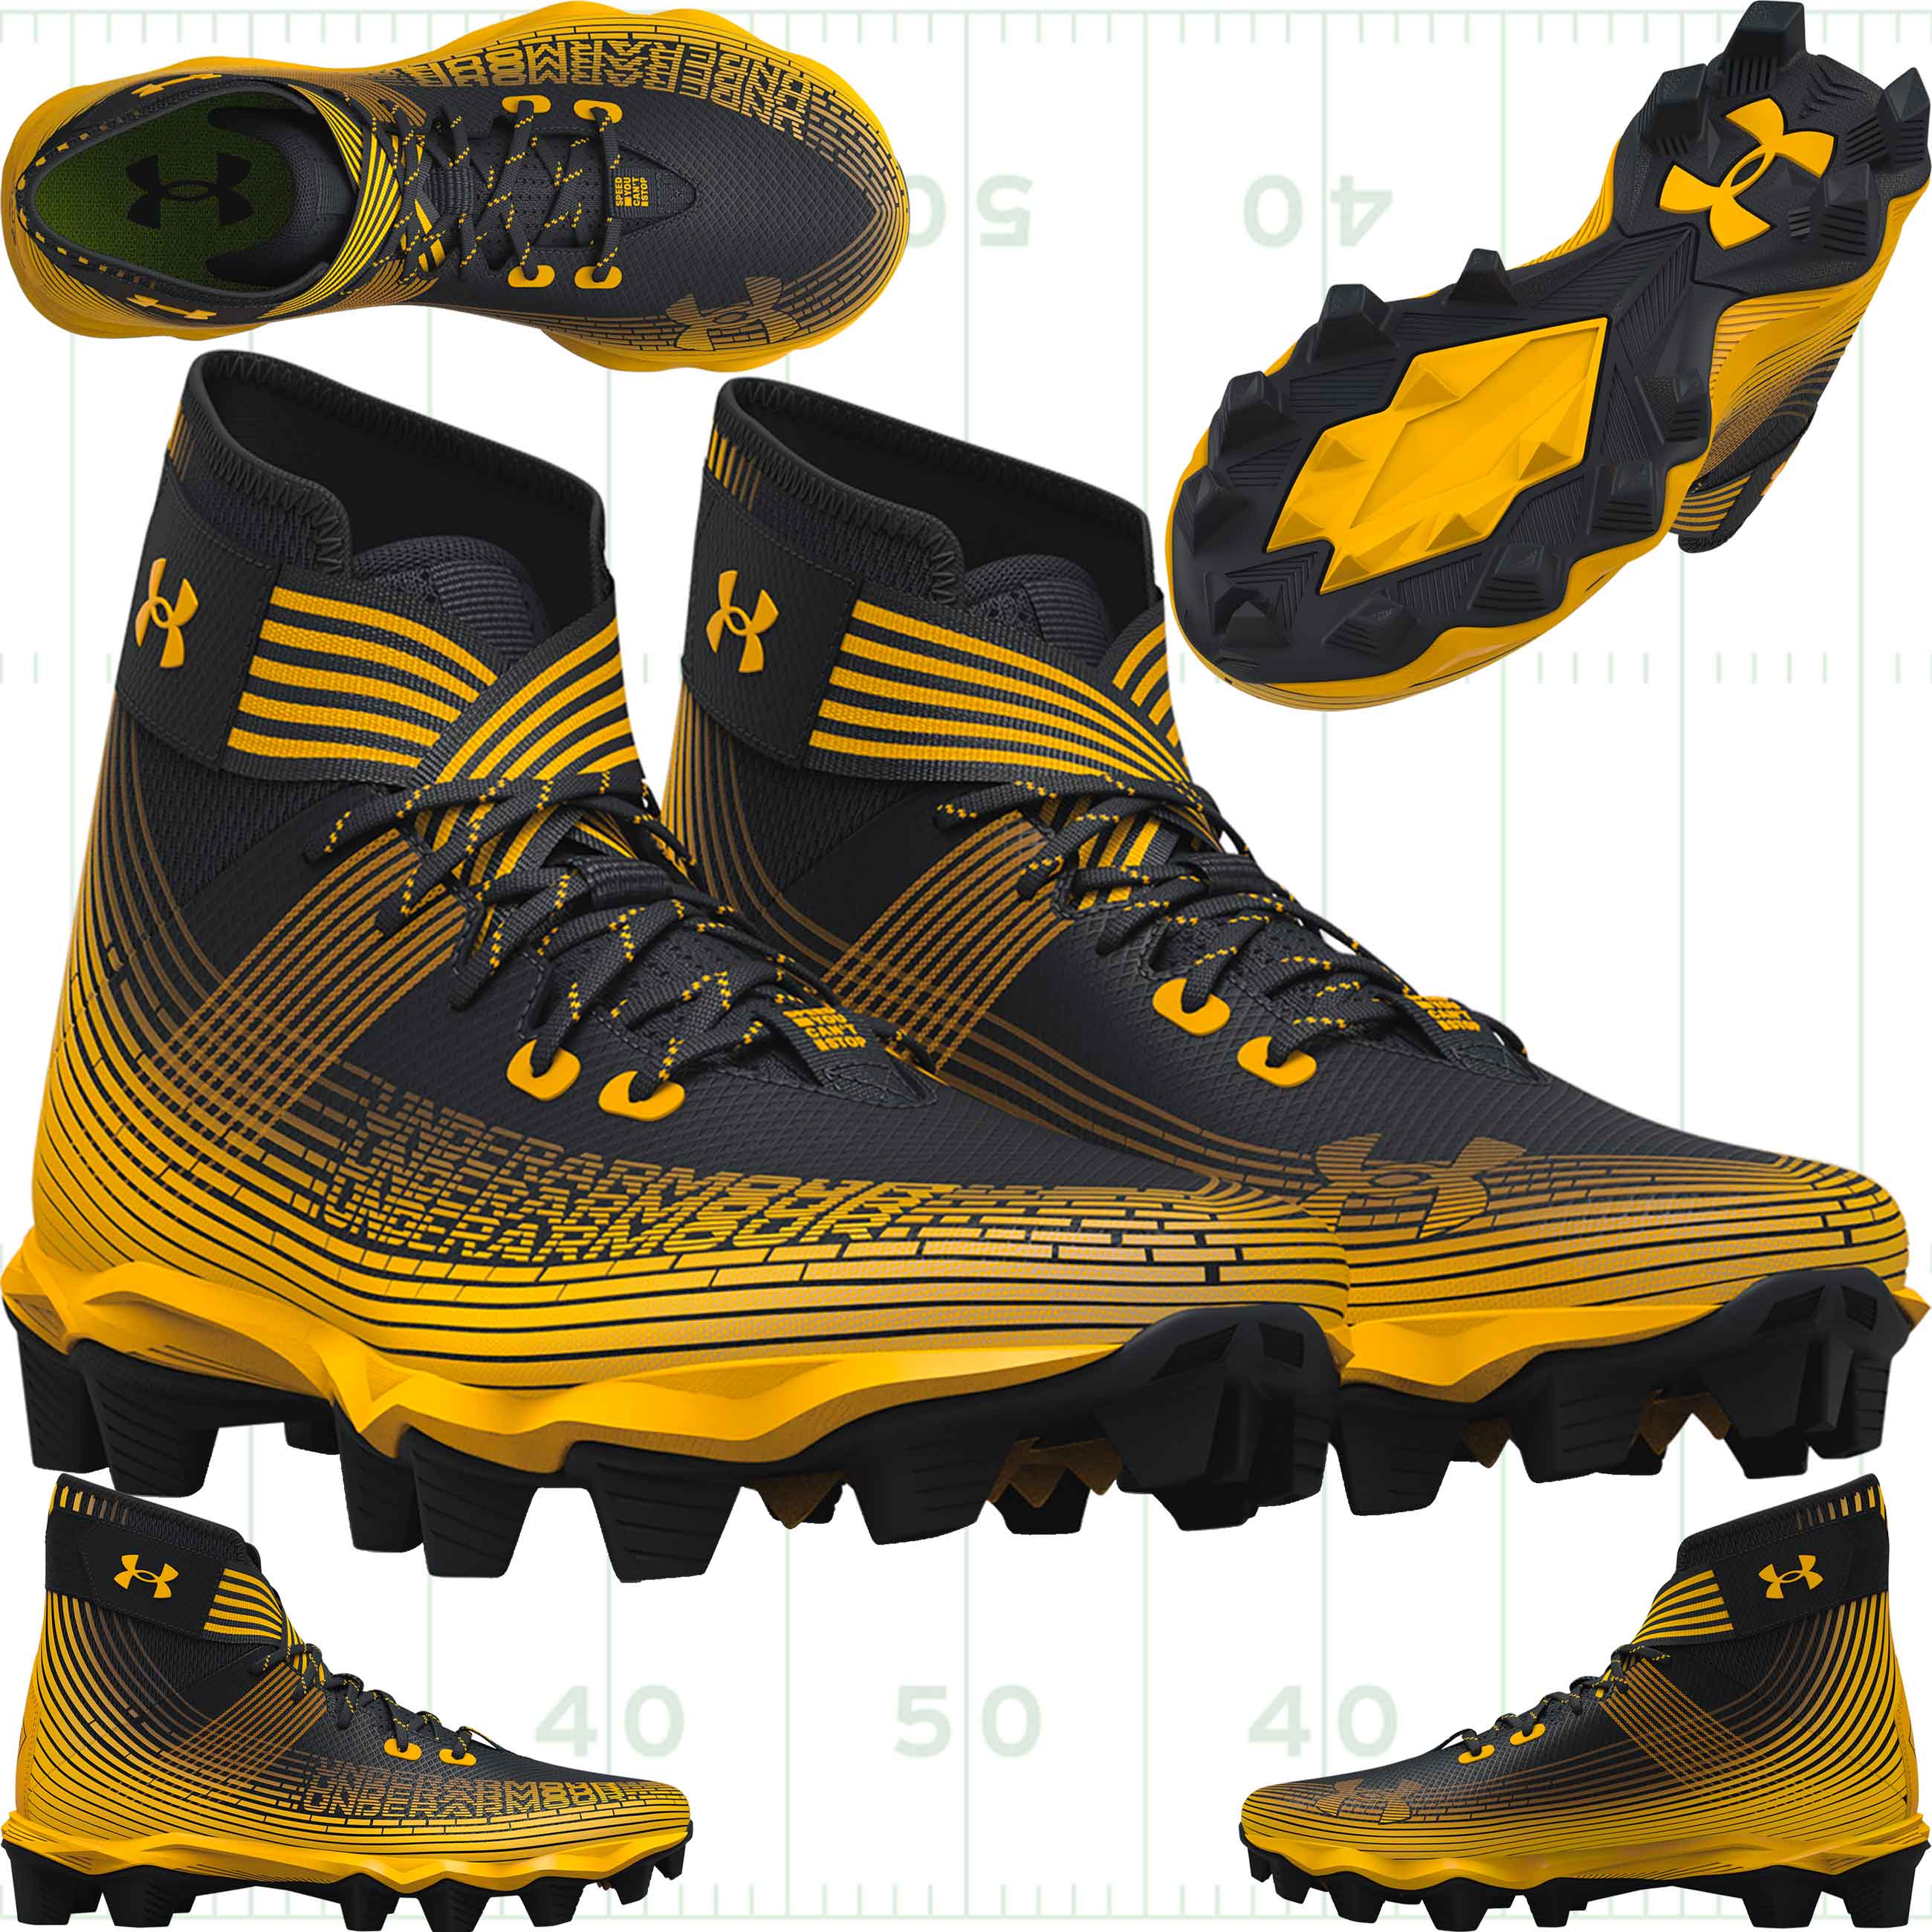 Under Armour Highlight Franchise Jr Youth Football Cleats - Black Gold